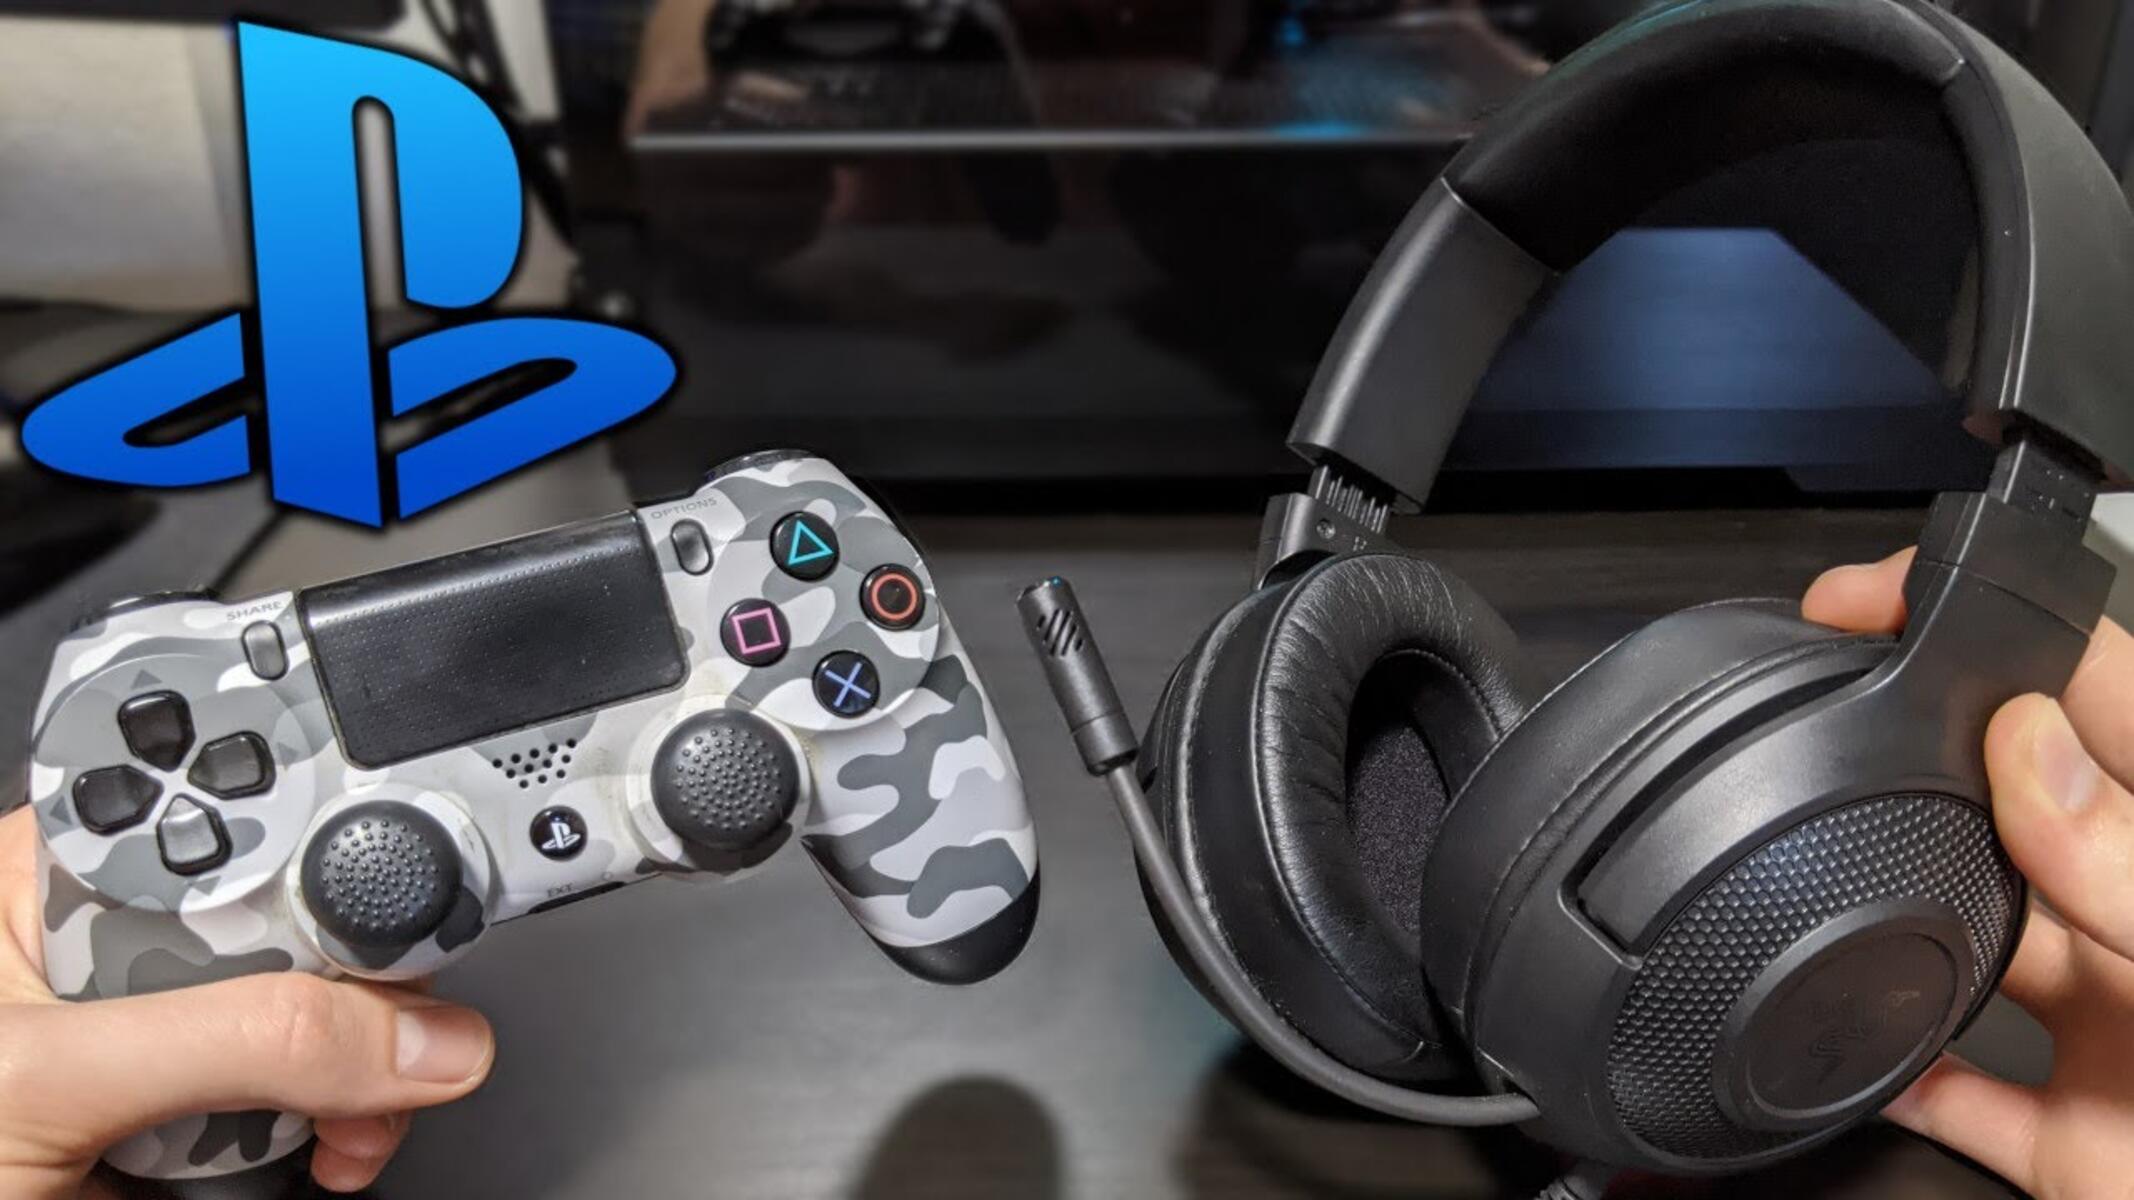 How Do You Set Up Gaming Headset For PS4?